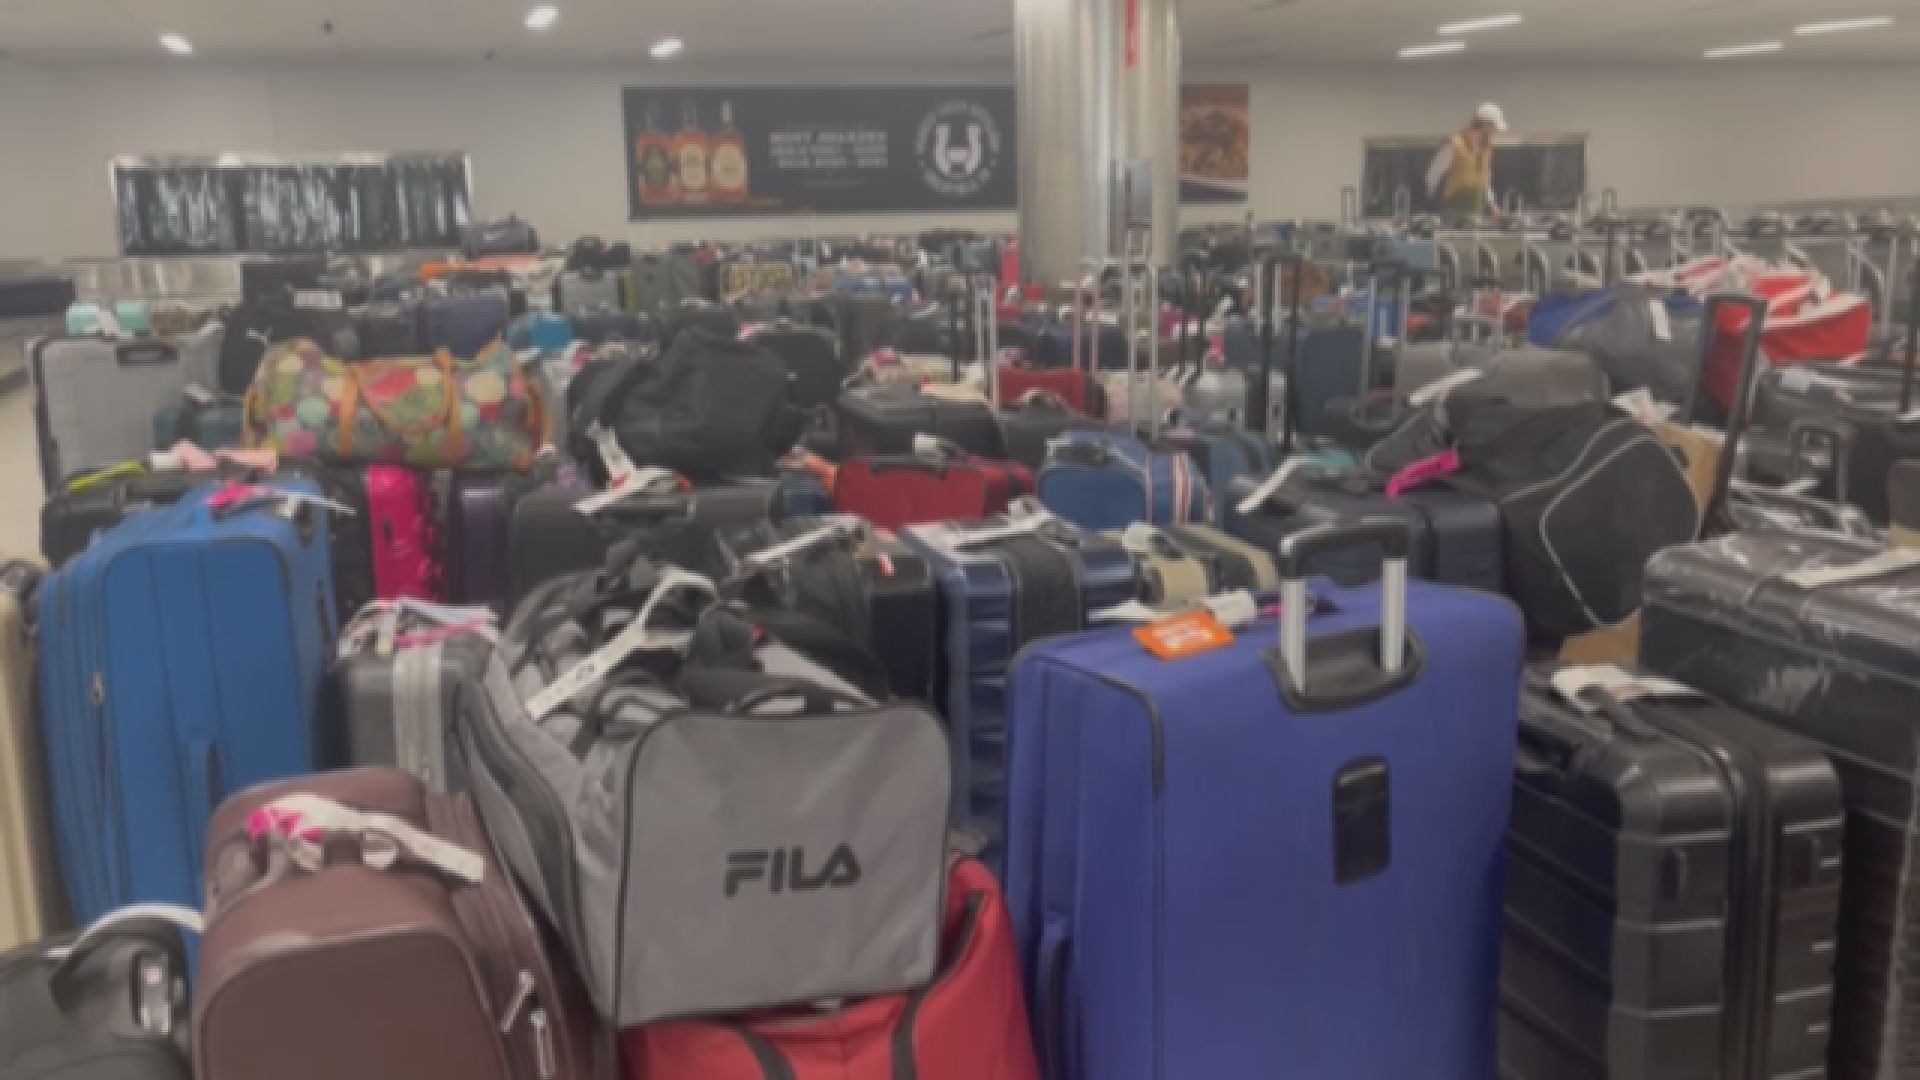 On Tuesday, more than 100 flights had been canceled at Nashville International Airport. Days of cancelations have caused an overflow of unclaimed luggage.